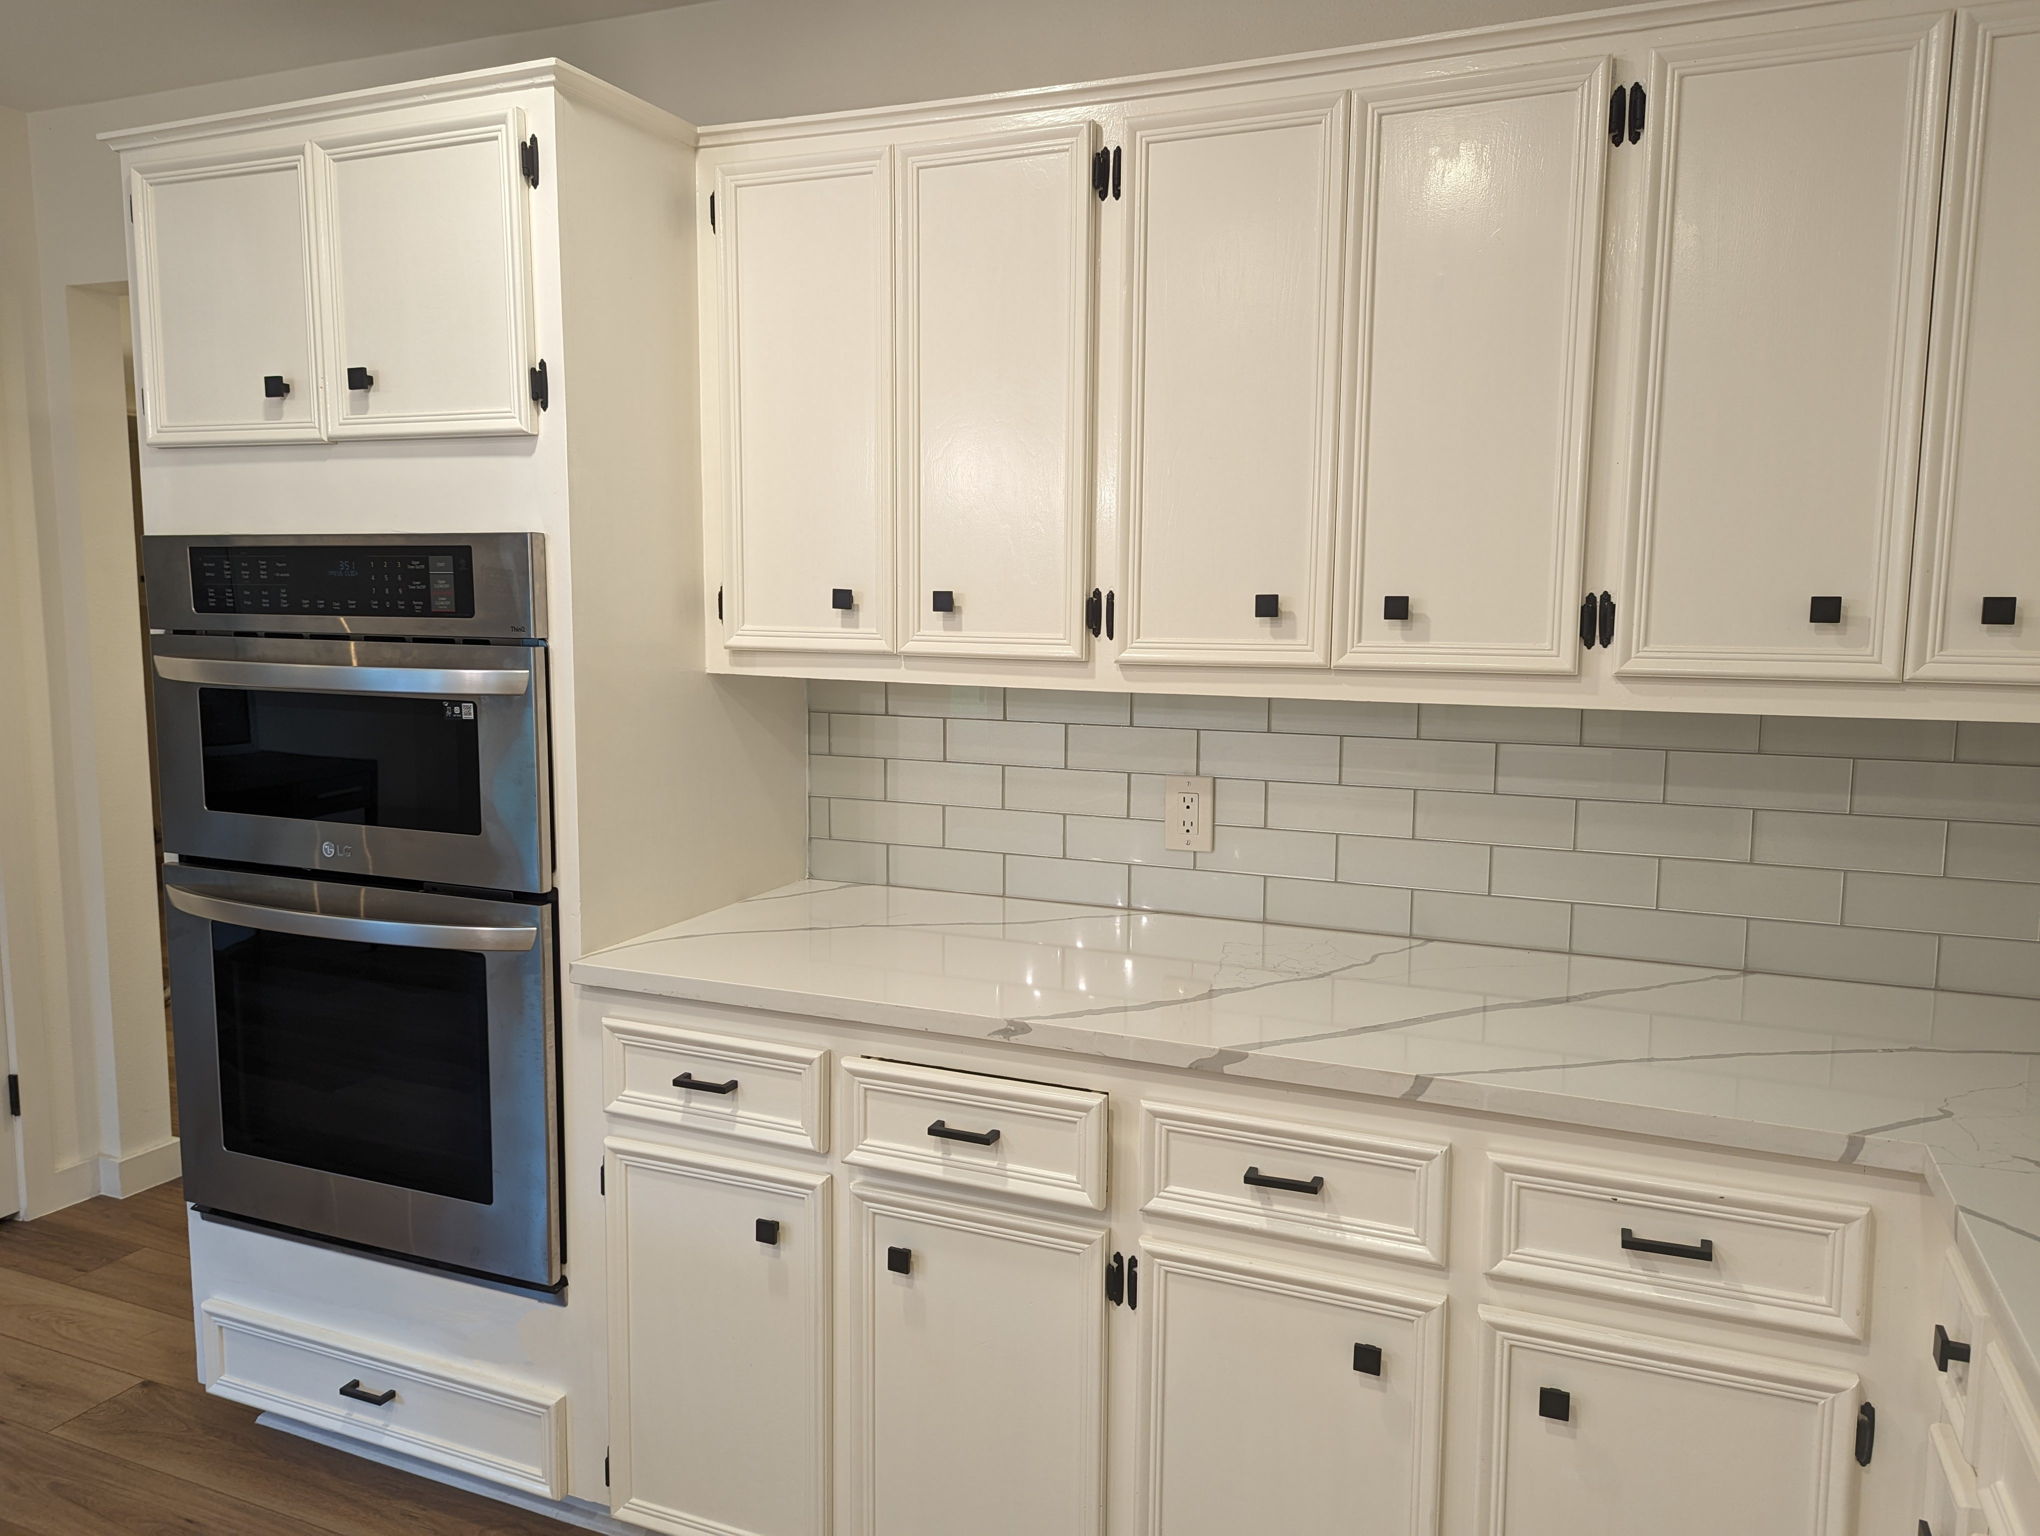 New Quarts counters and appliances